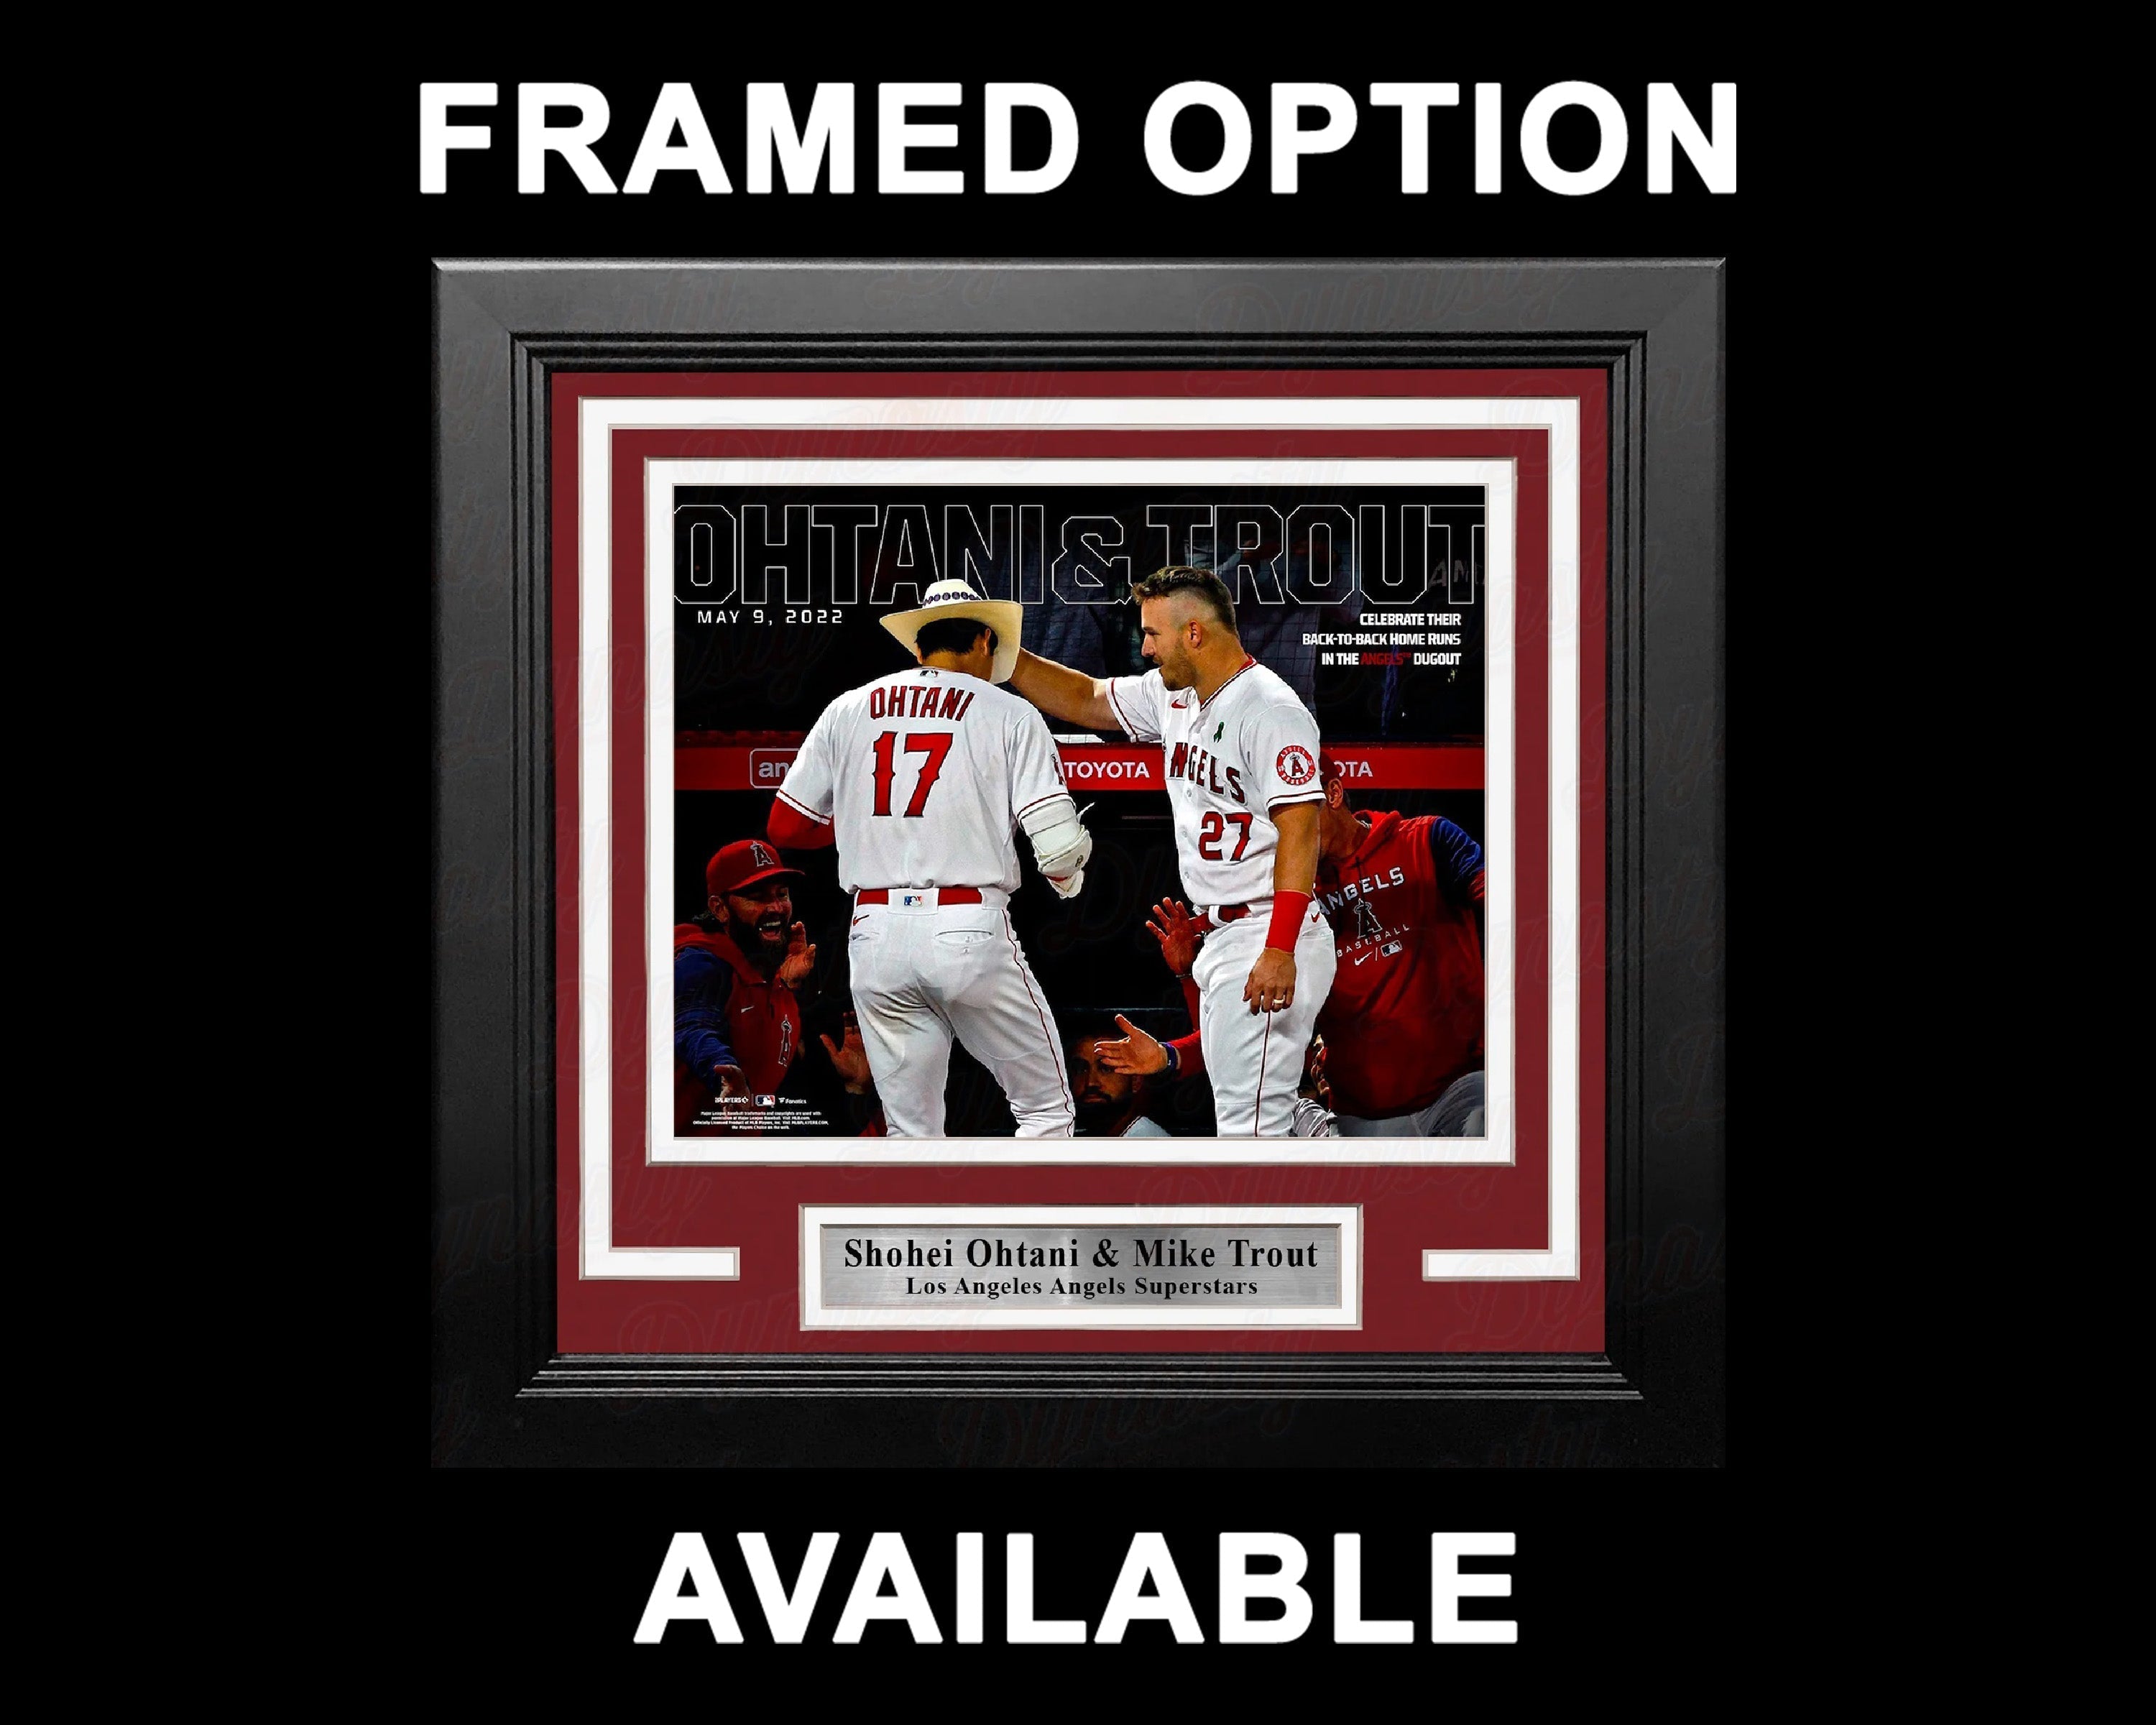 Shohei Ohtani, Aaron Judge and Giancarlo Stanton 8x10 photo signed with proof